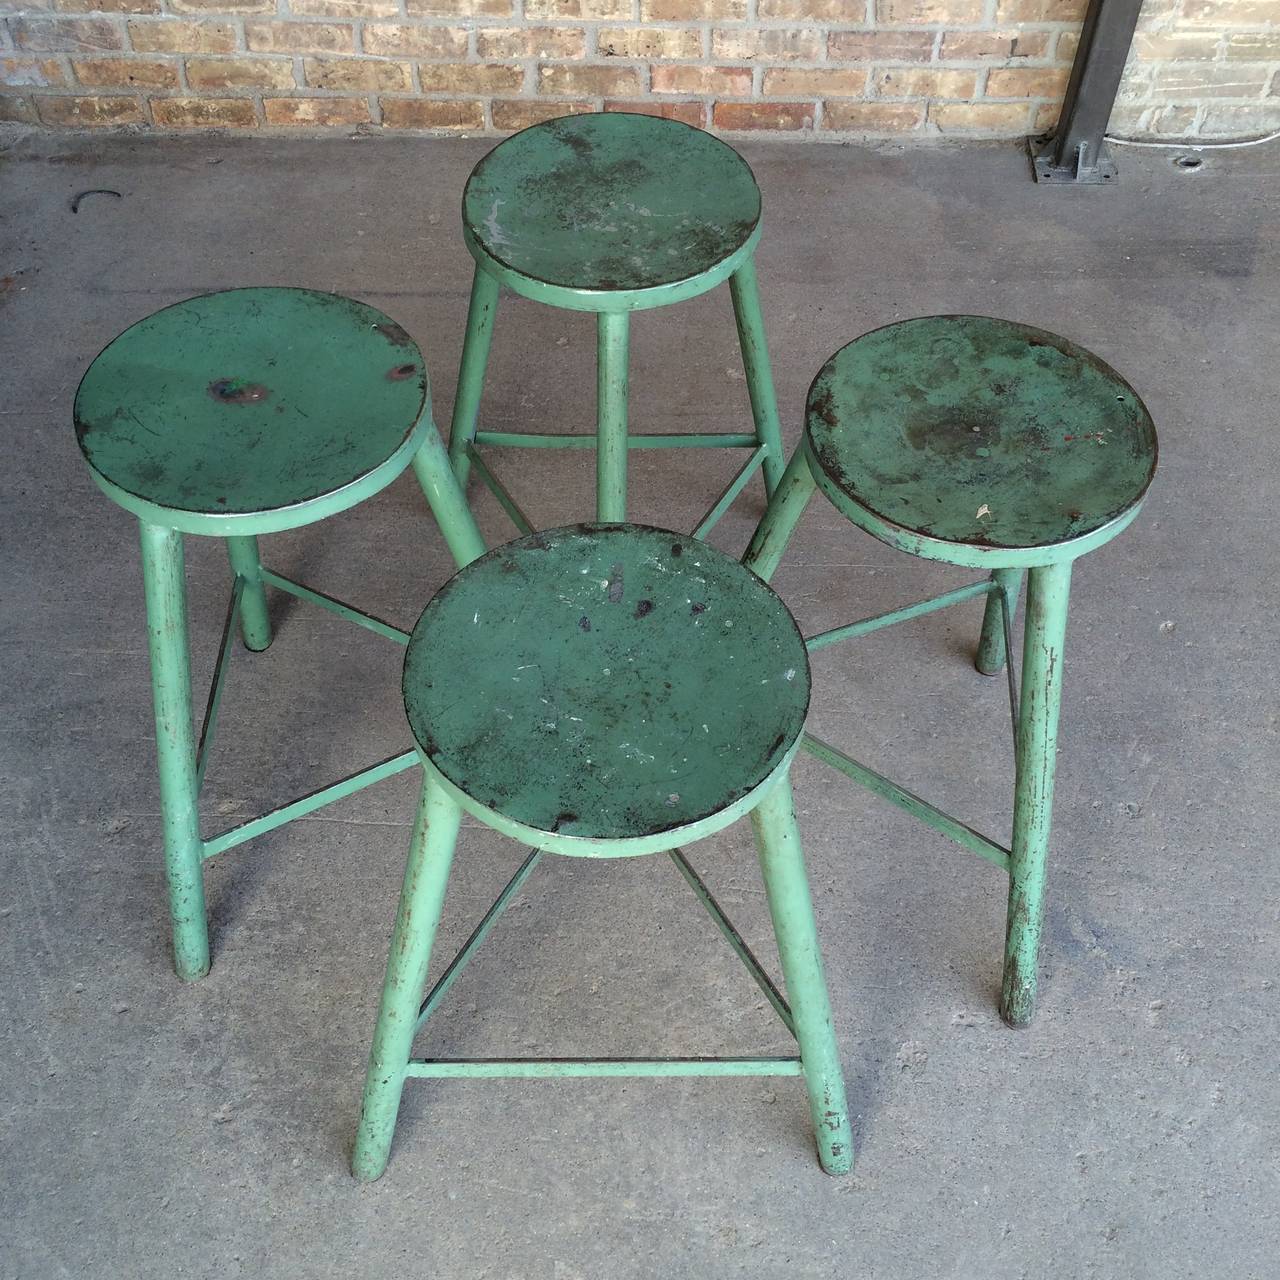 Iron Vintage Industrial Metal Stools with Original Paint For Sale